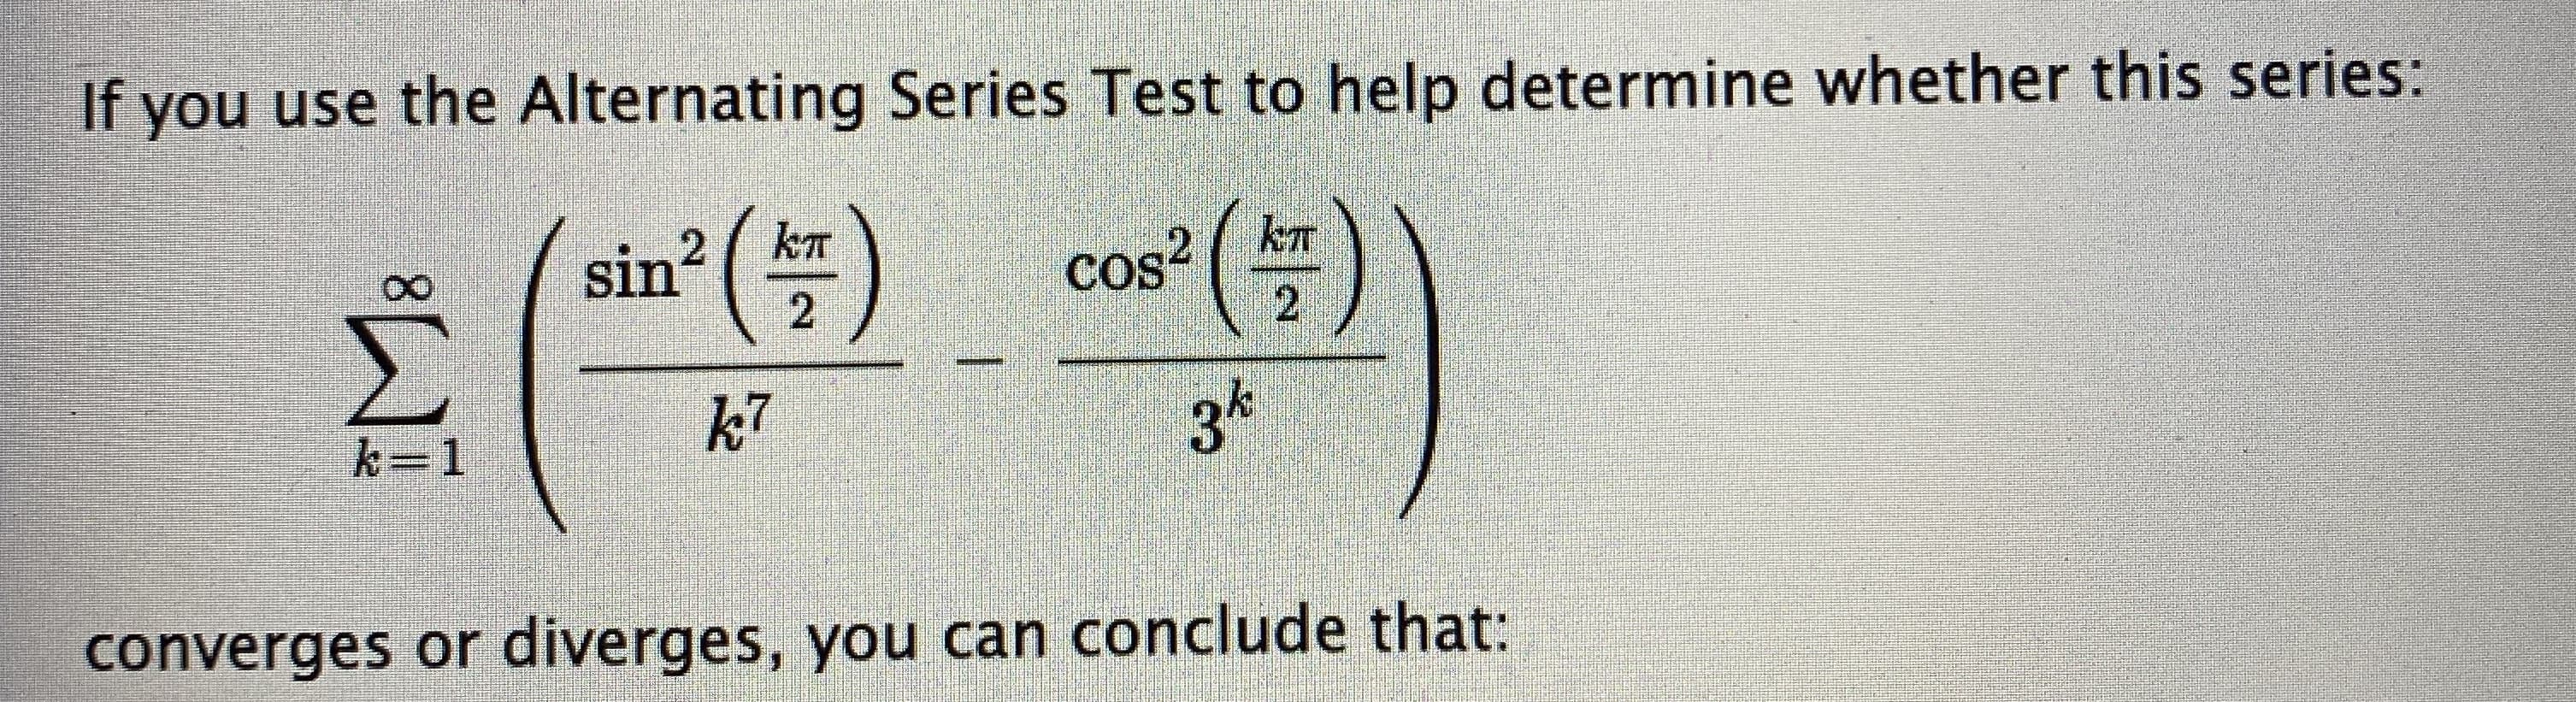 If you use the Alternating Series Test to help determine whether this series:
